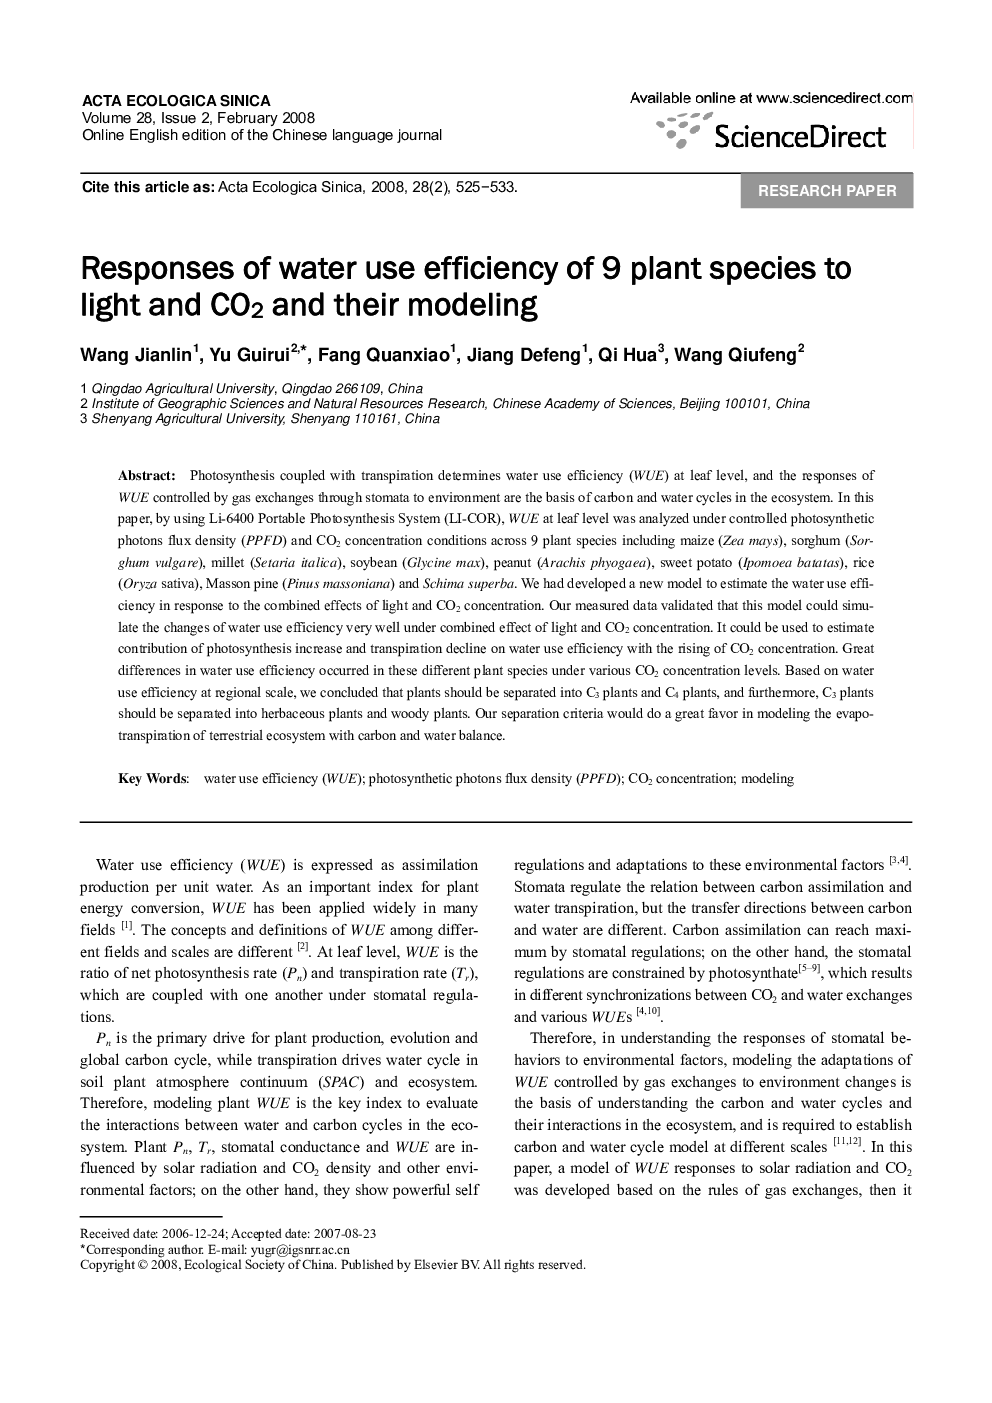 Responses of water use efficiency of 9 plant species to light and CO2 and their modeling